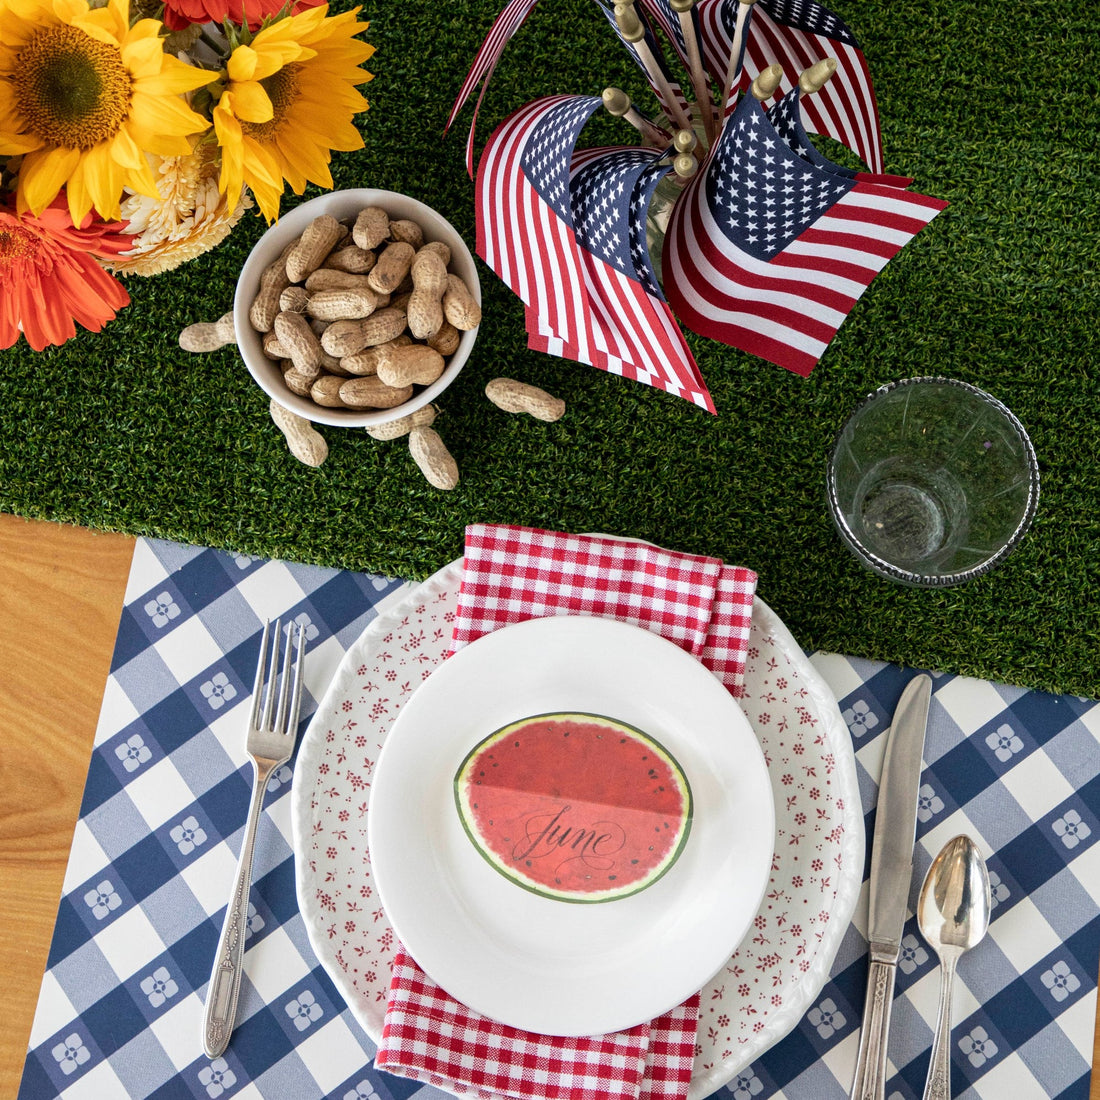 The blue Picnic Check Placemat under a patriotic-themed place setting, from above.